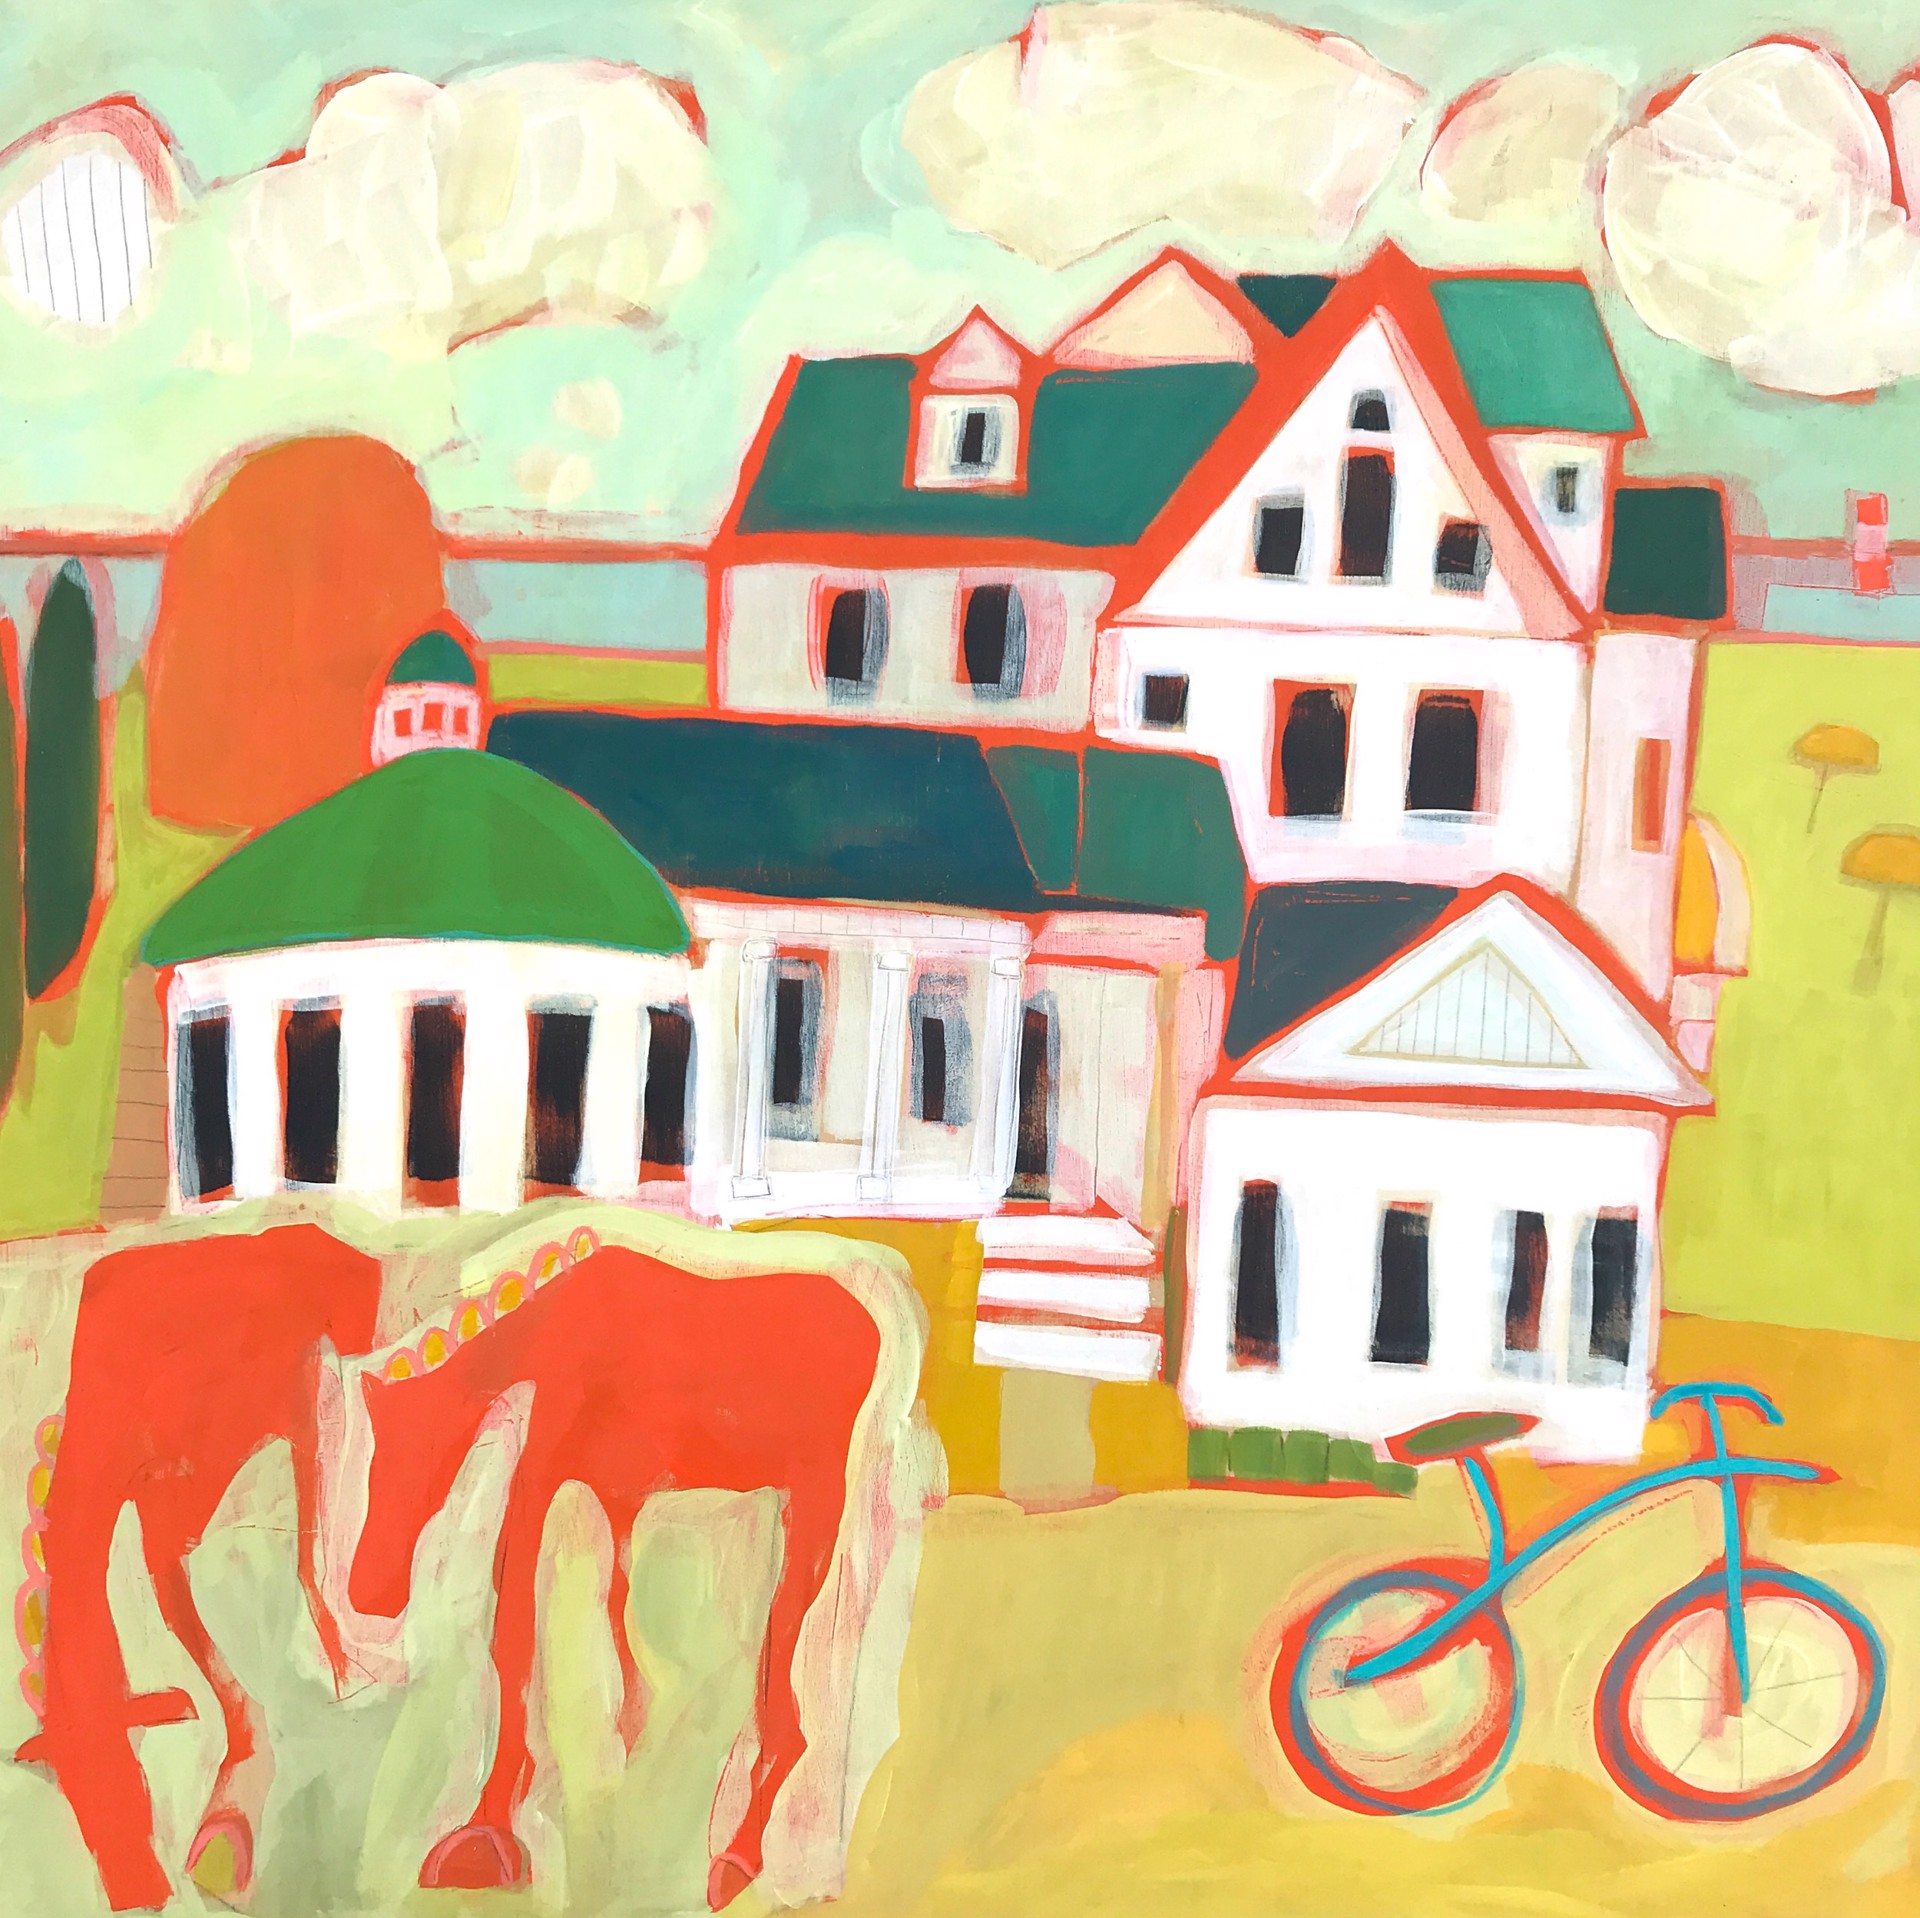 Hotel Iroquois and Two Orange Horses by Rachael Van Dyke